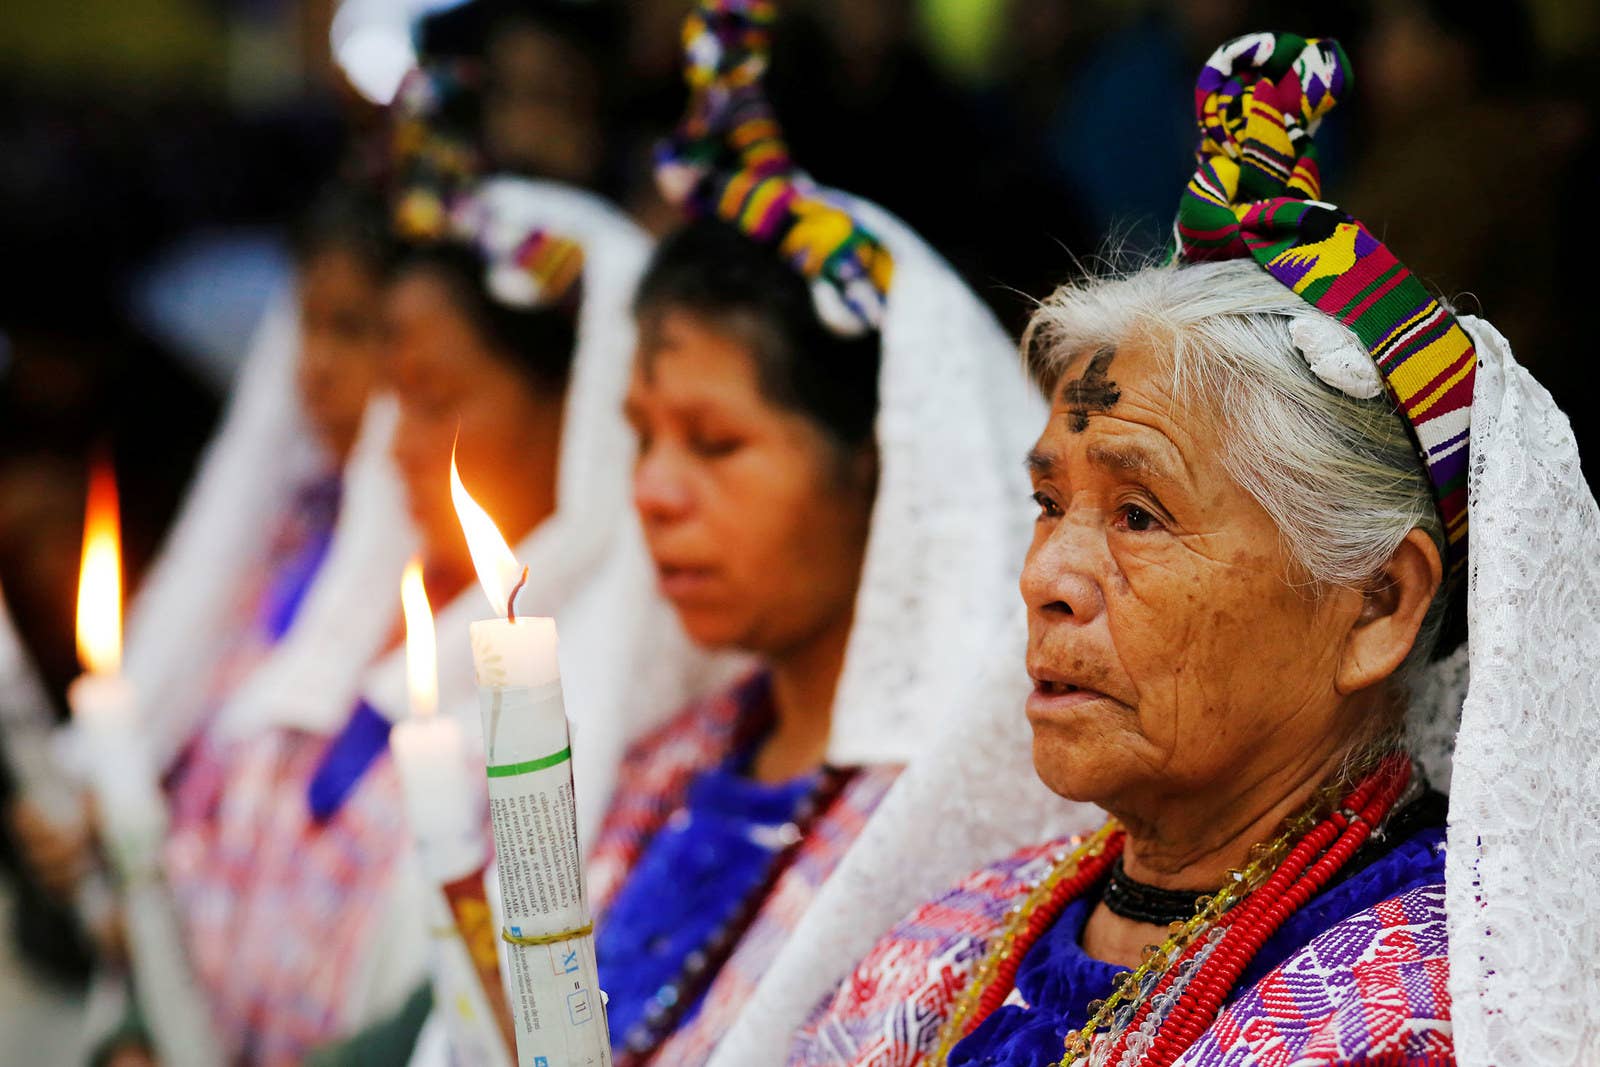 Indigenous Mayan women, with a cross of ashes on their foreheads, attend an Ash Wednesday mass in the municipality of San Juan Sacatepéquez, Guatemala, on Feb. 14.